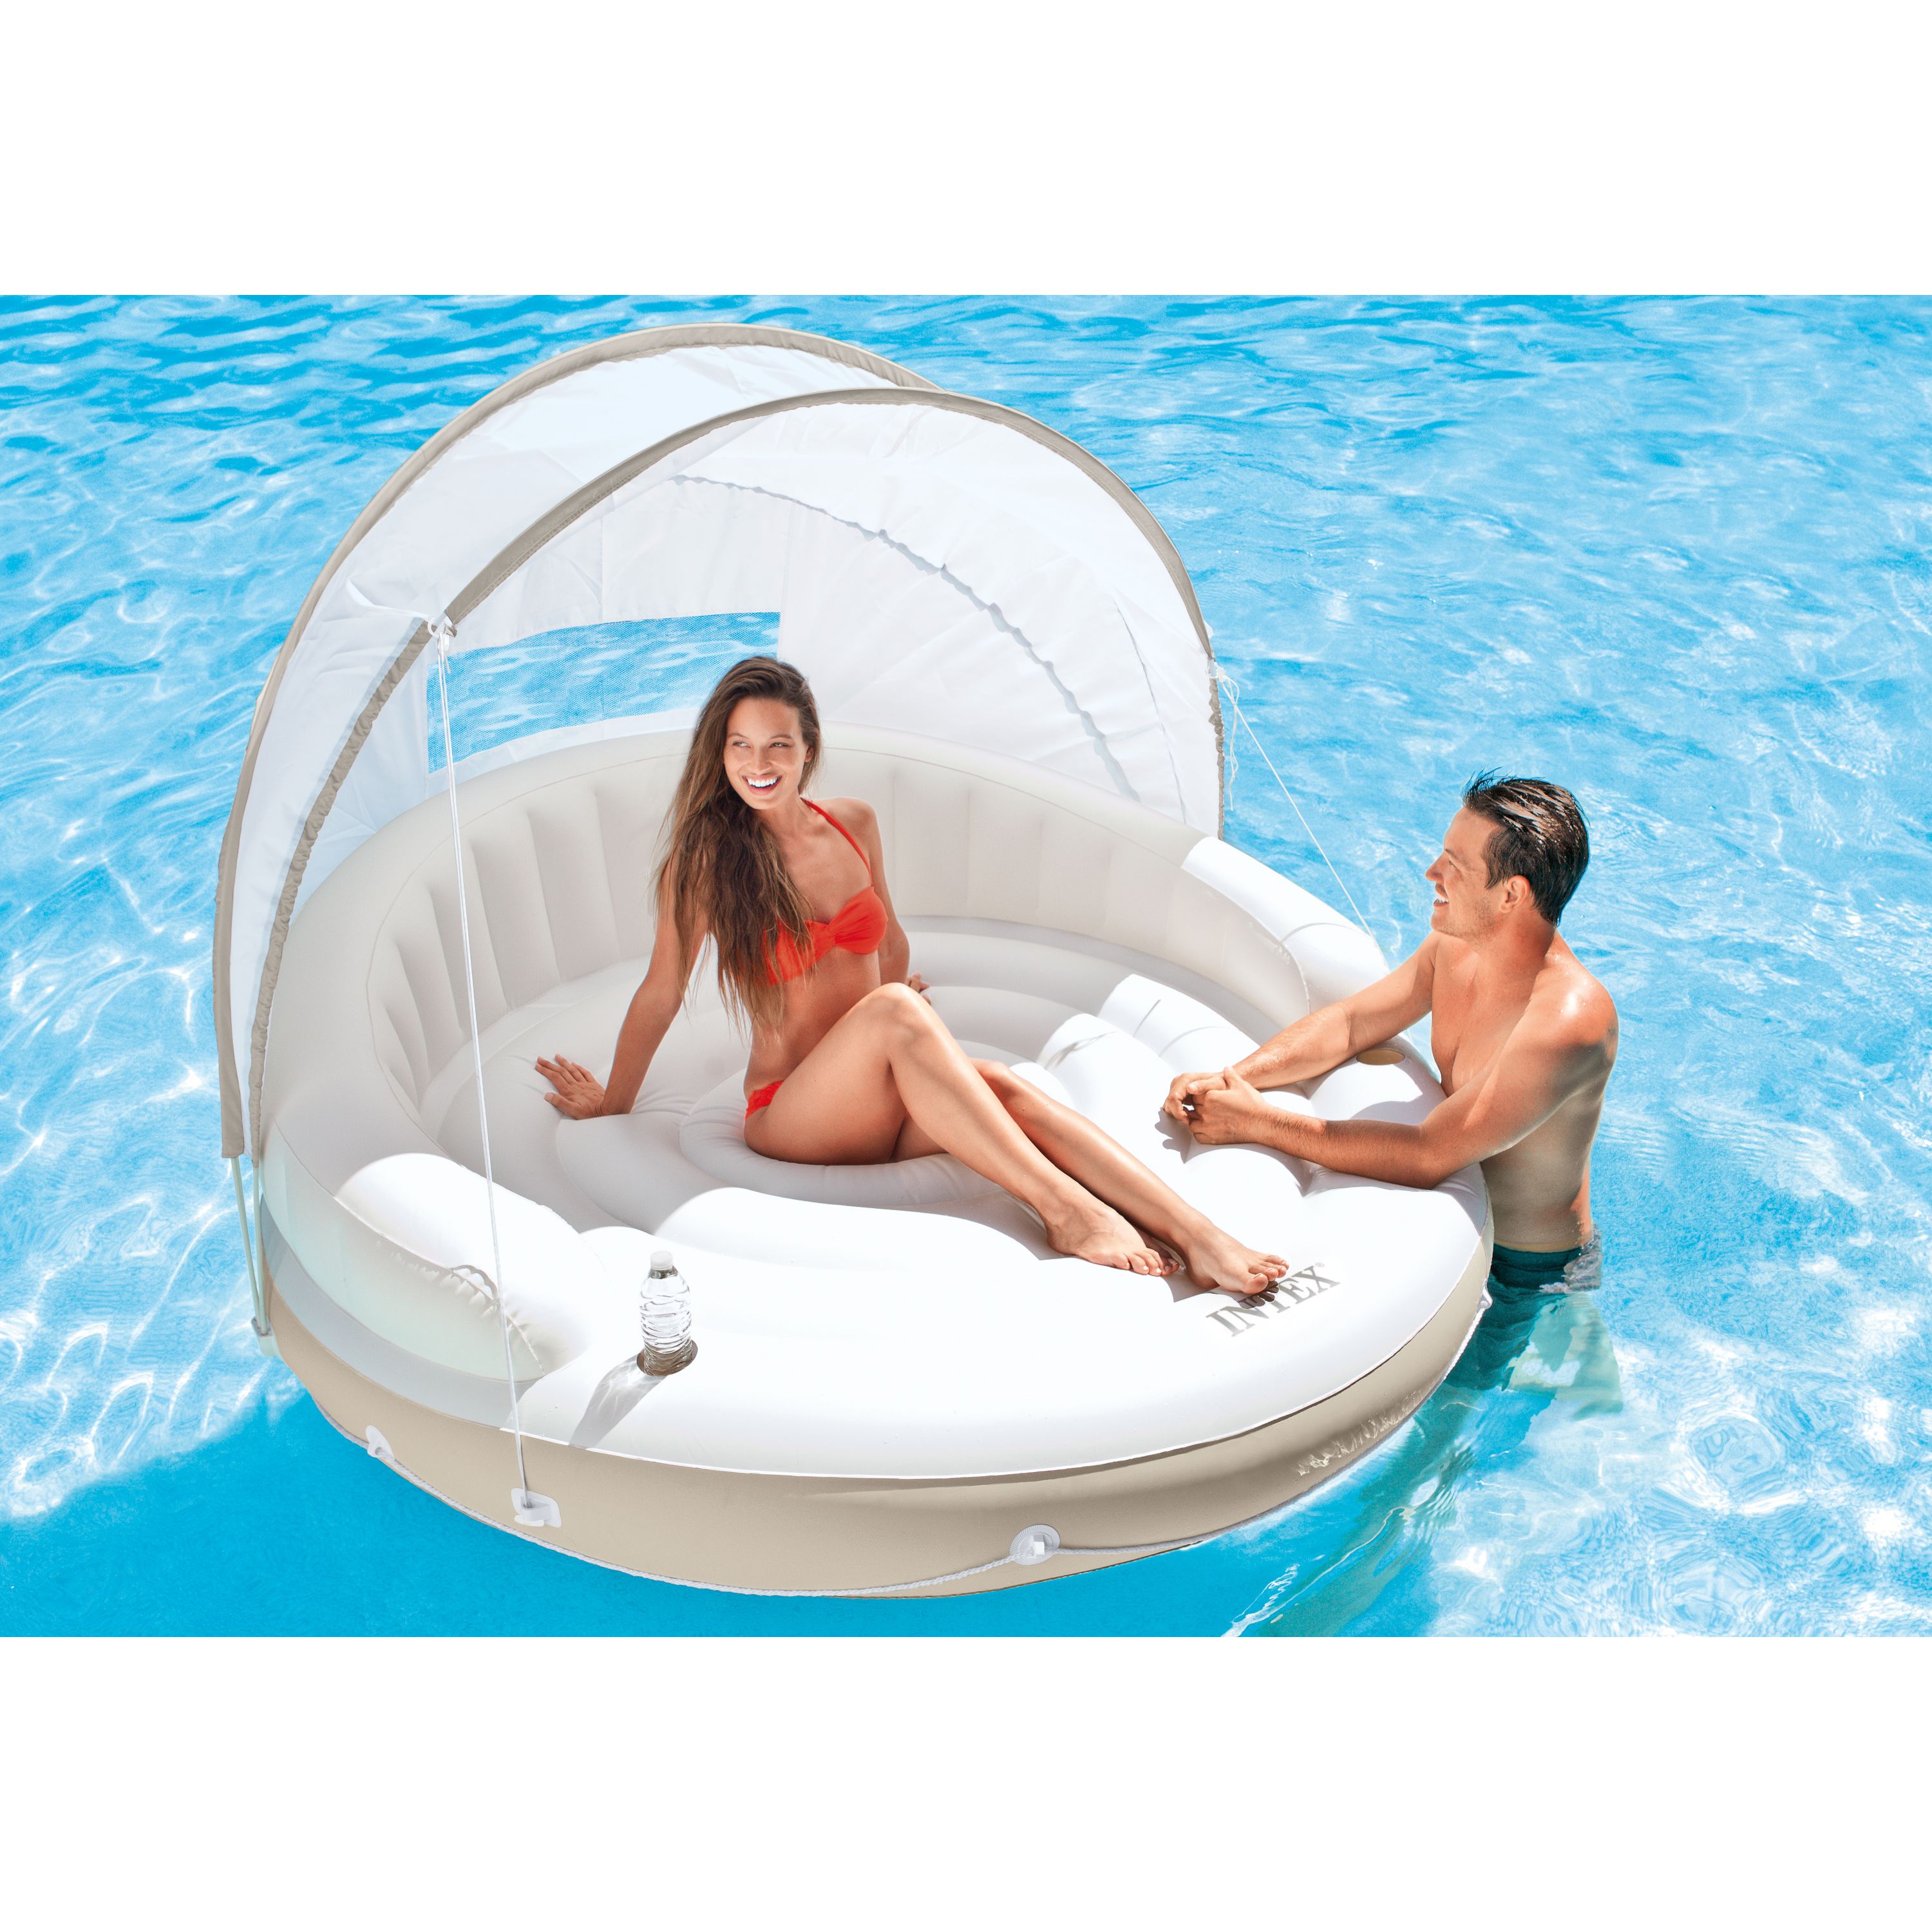 Intex Inflatable Canopy Island Float Lounge, 78.5" x 59" - image 4 of 4